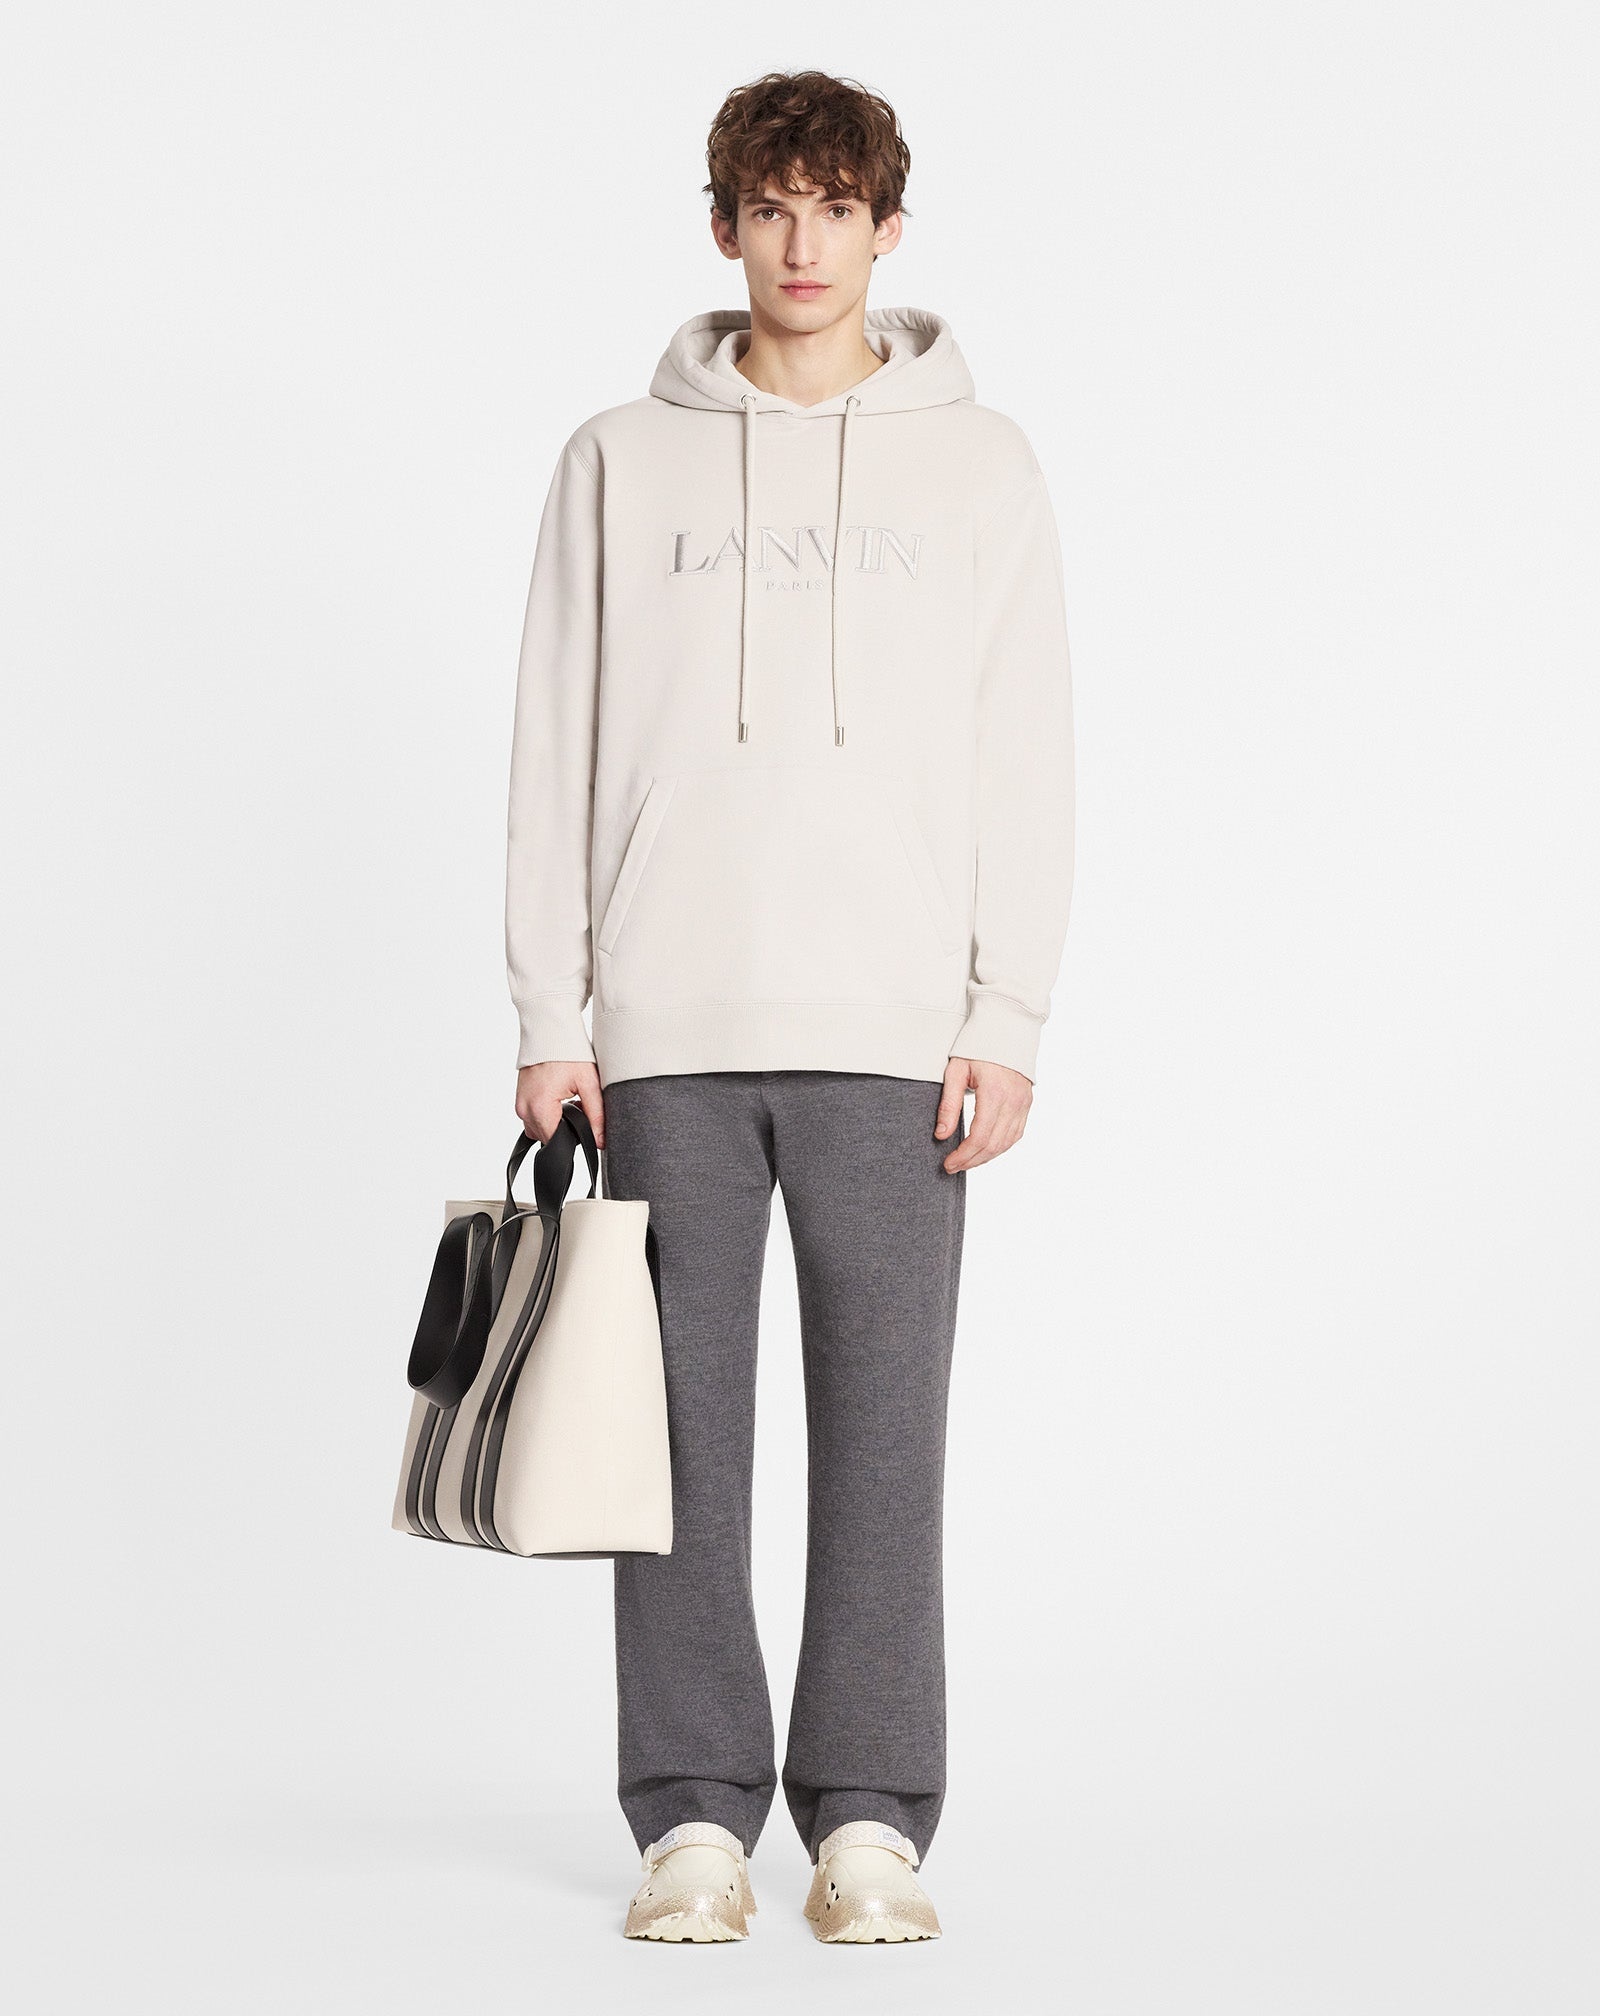 OVERSIZED EMBROIDERED LANVIN PARIS HOODIE - 2